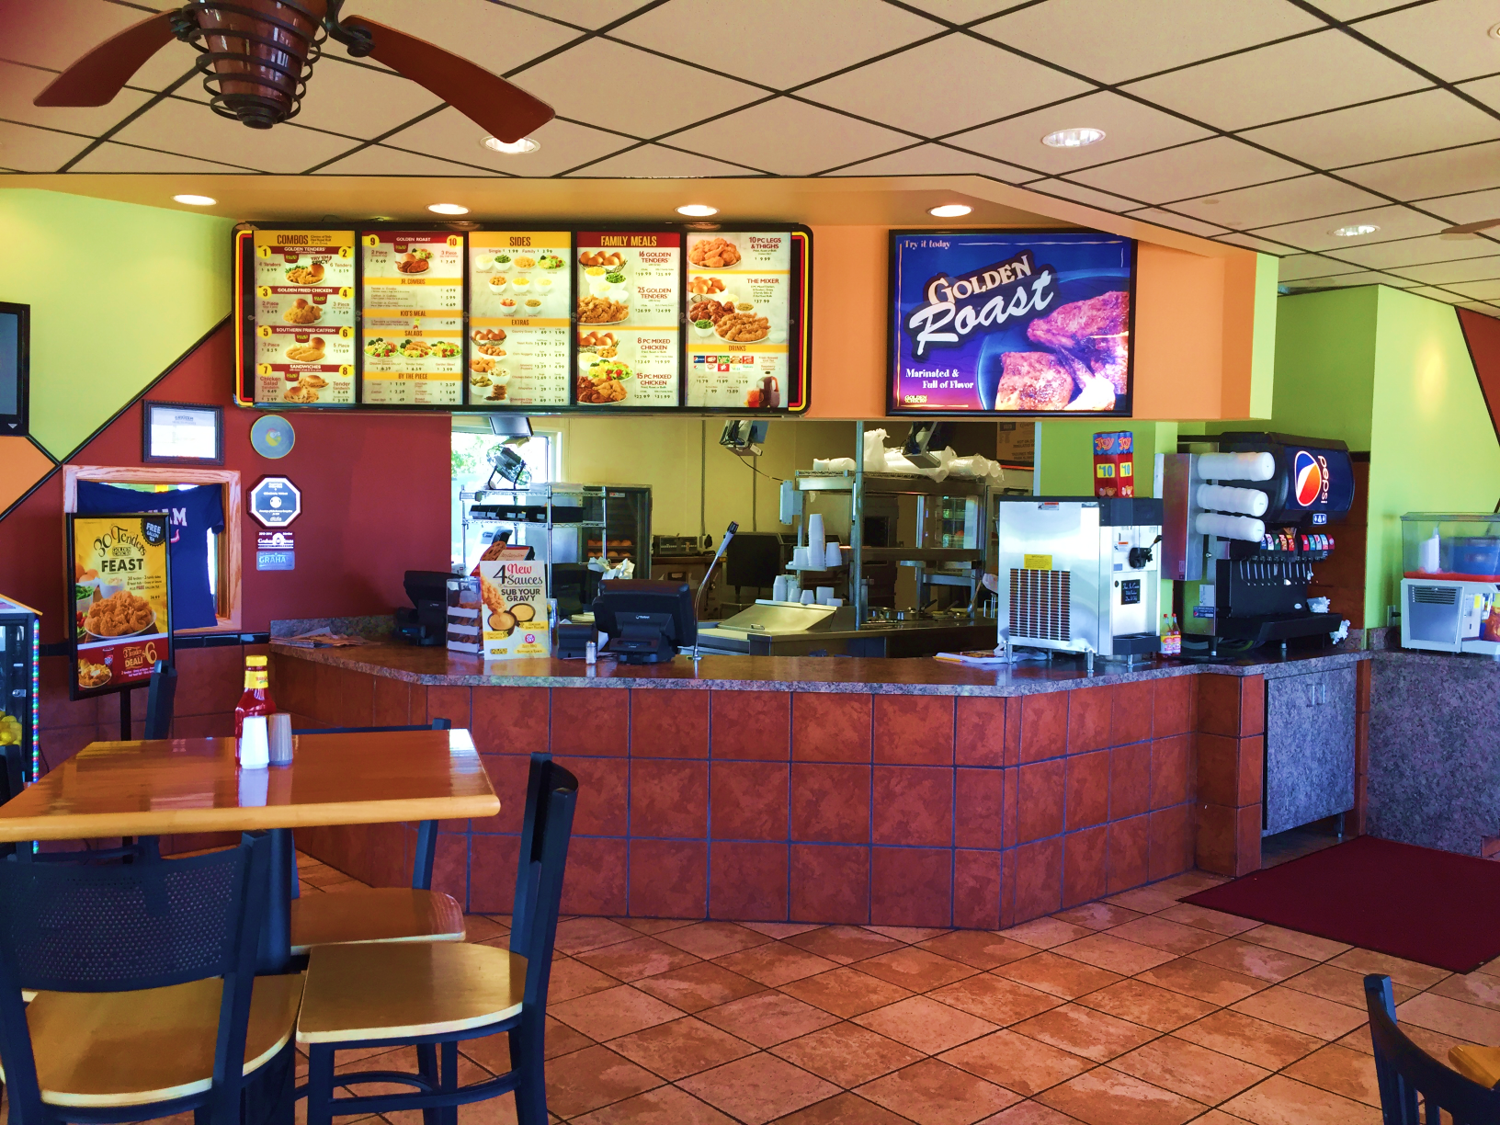 Golden Chick storefront.  Your local Golden Chick fast food restaurant in Graham, Texas